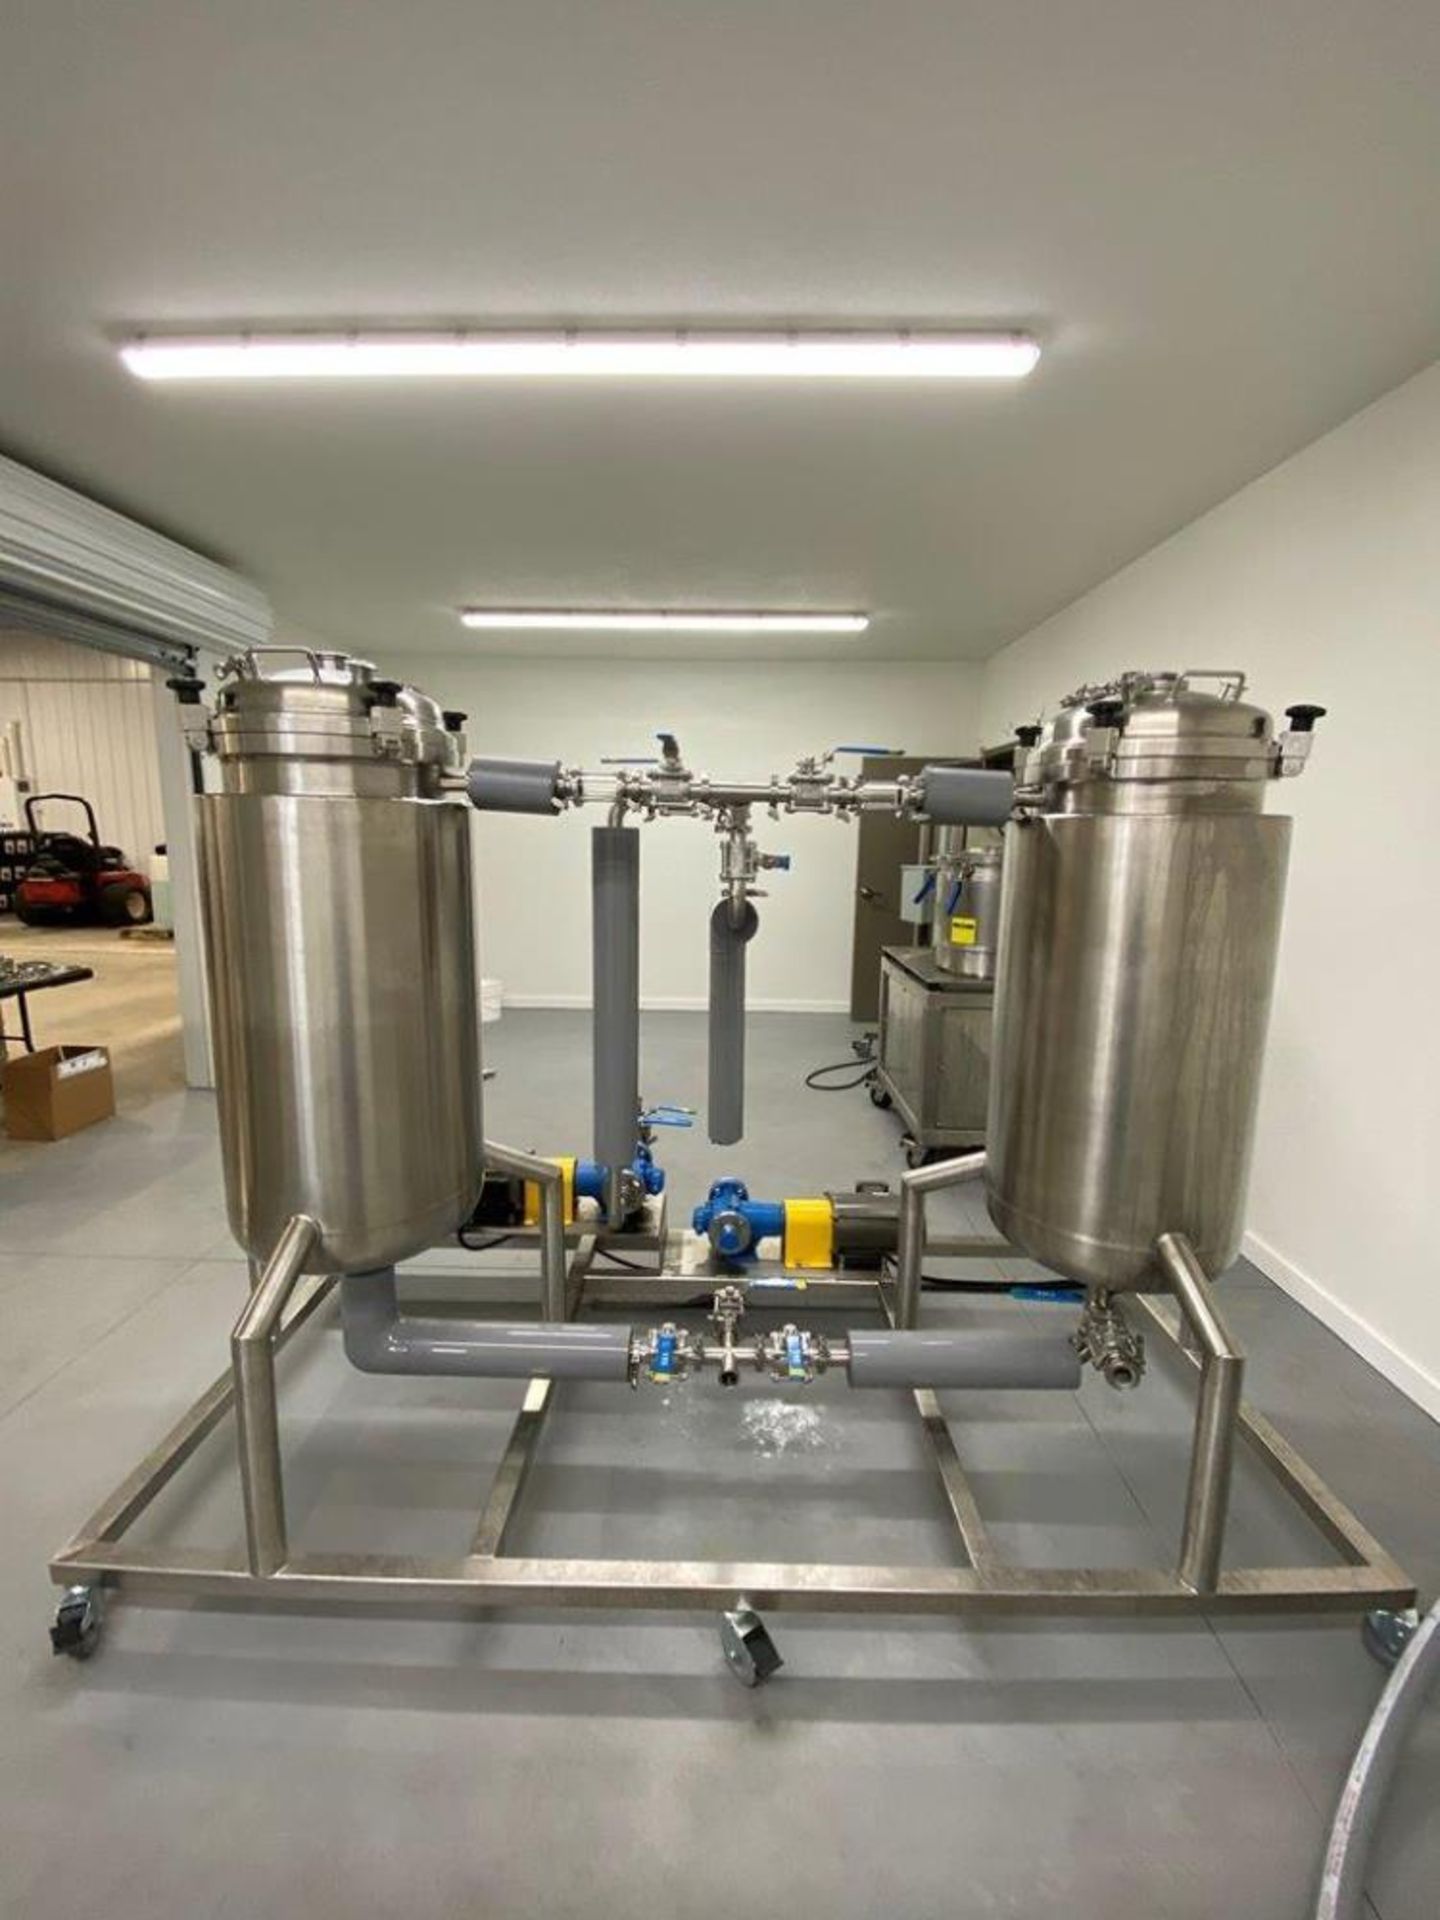 Pinnacle Stainless Alcohol Extraction Skid - Image 2 of 7